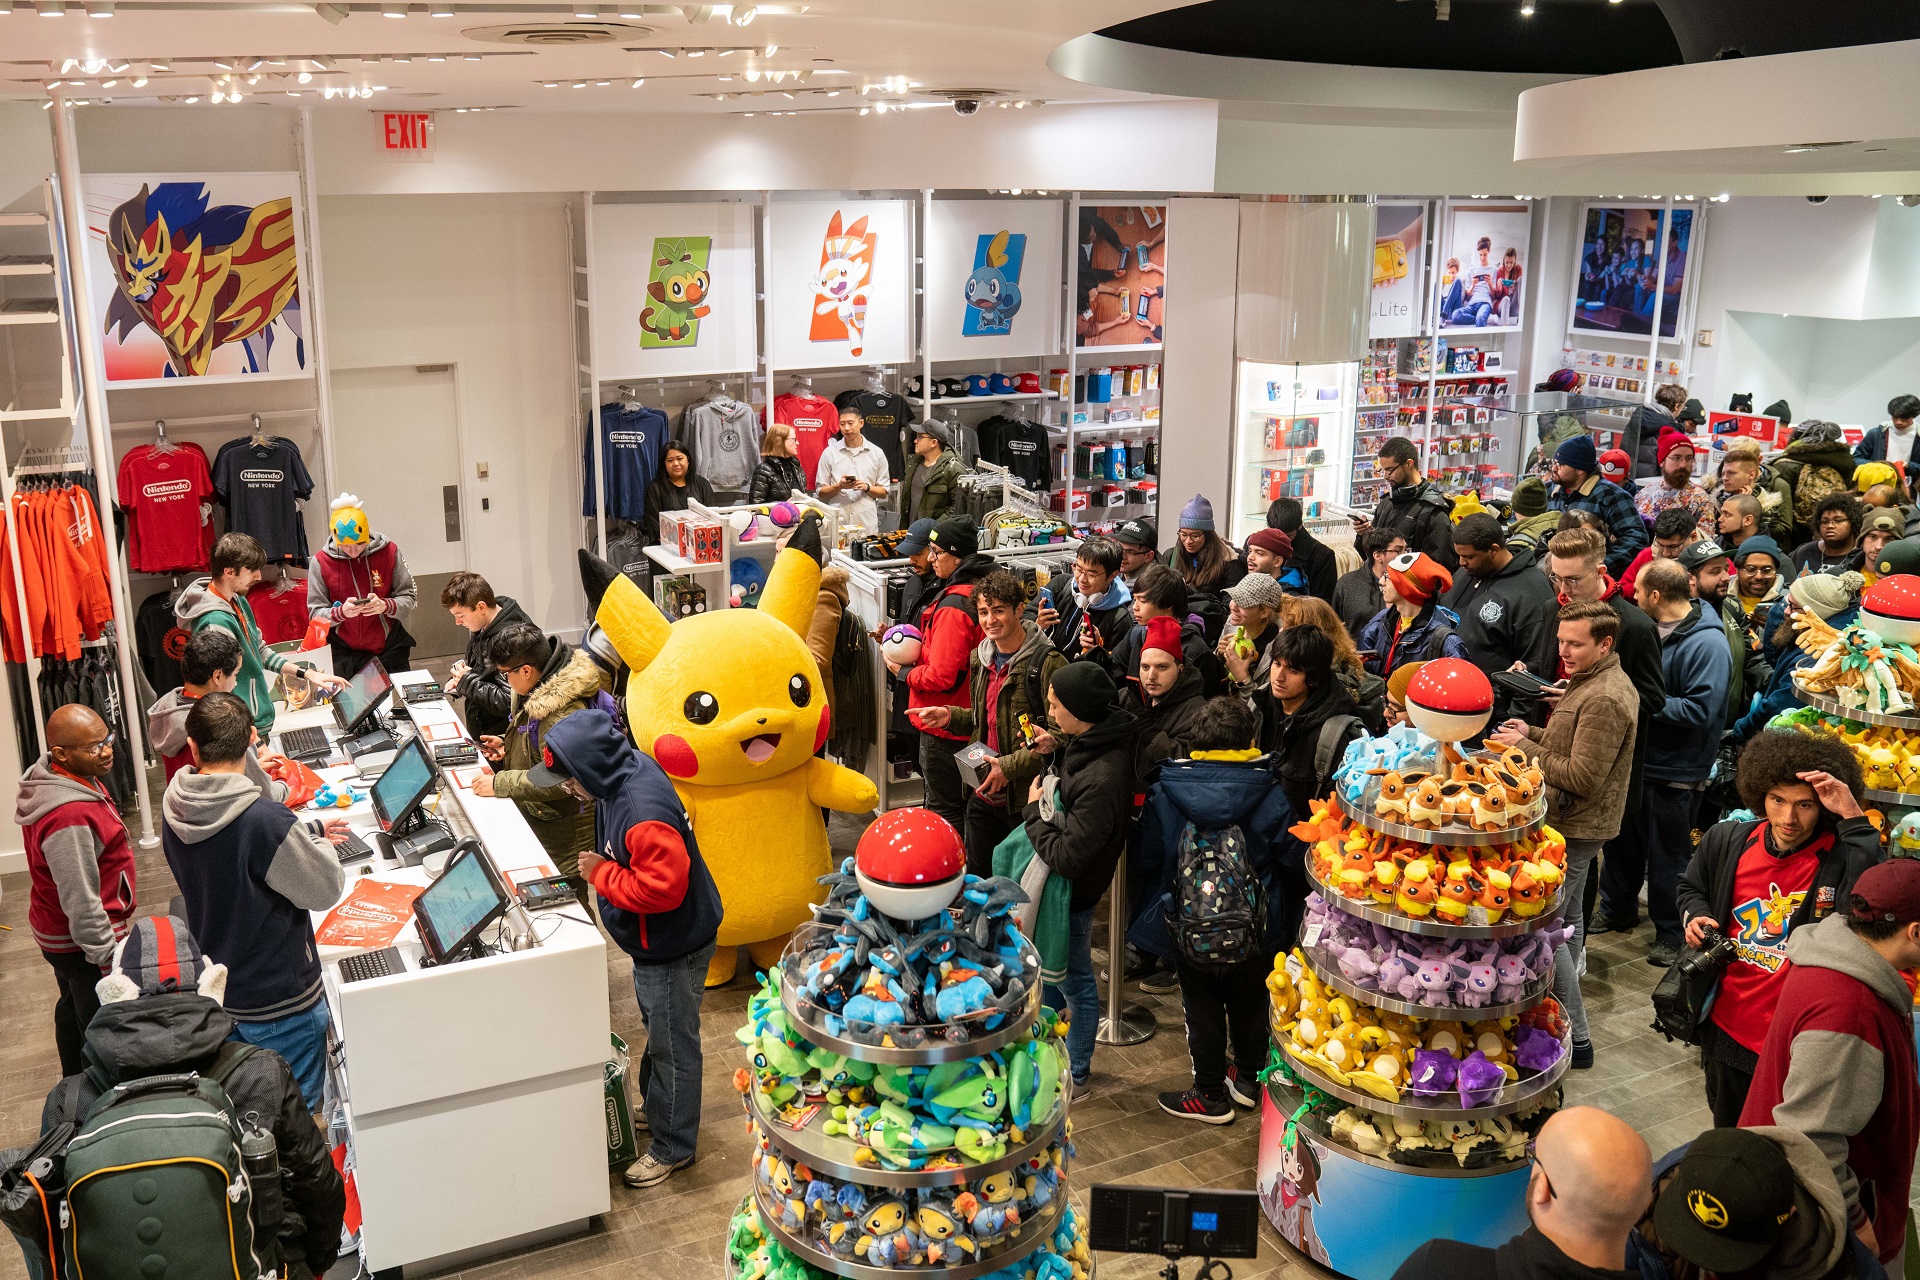 Photos Released of Pokémon Sword and Pokémon Shield Launch Event at Nintendo NY